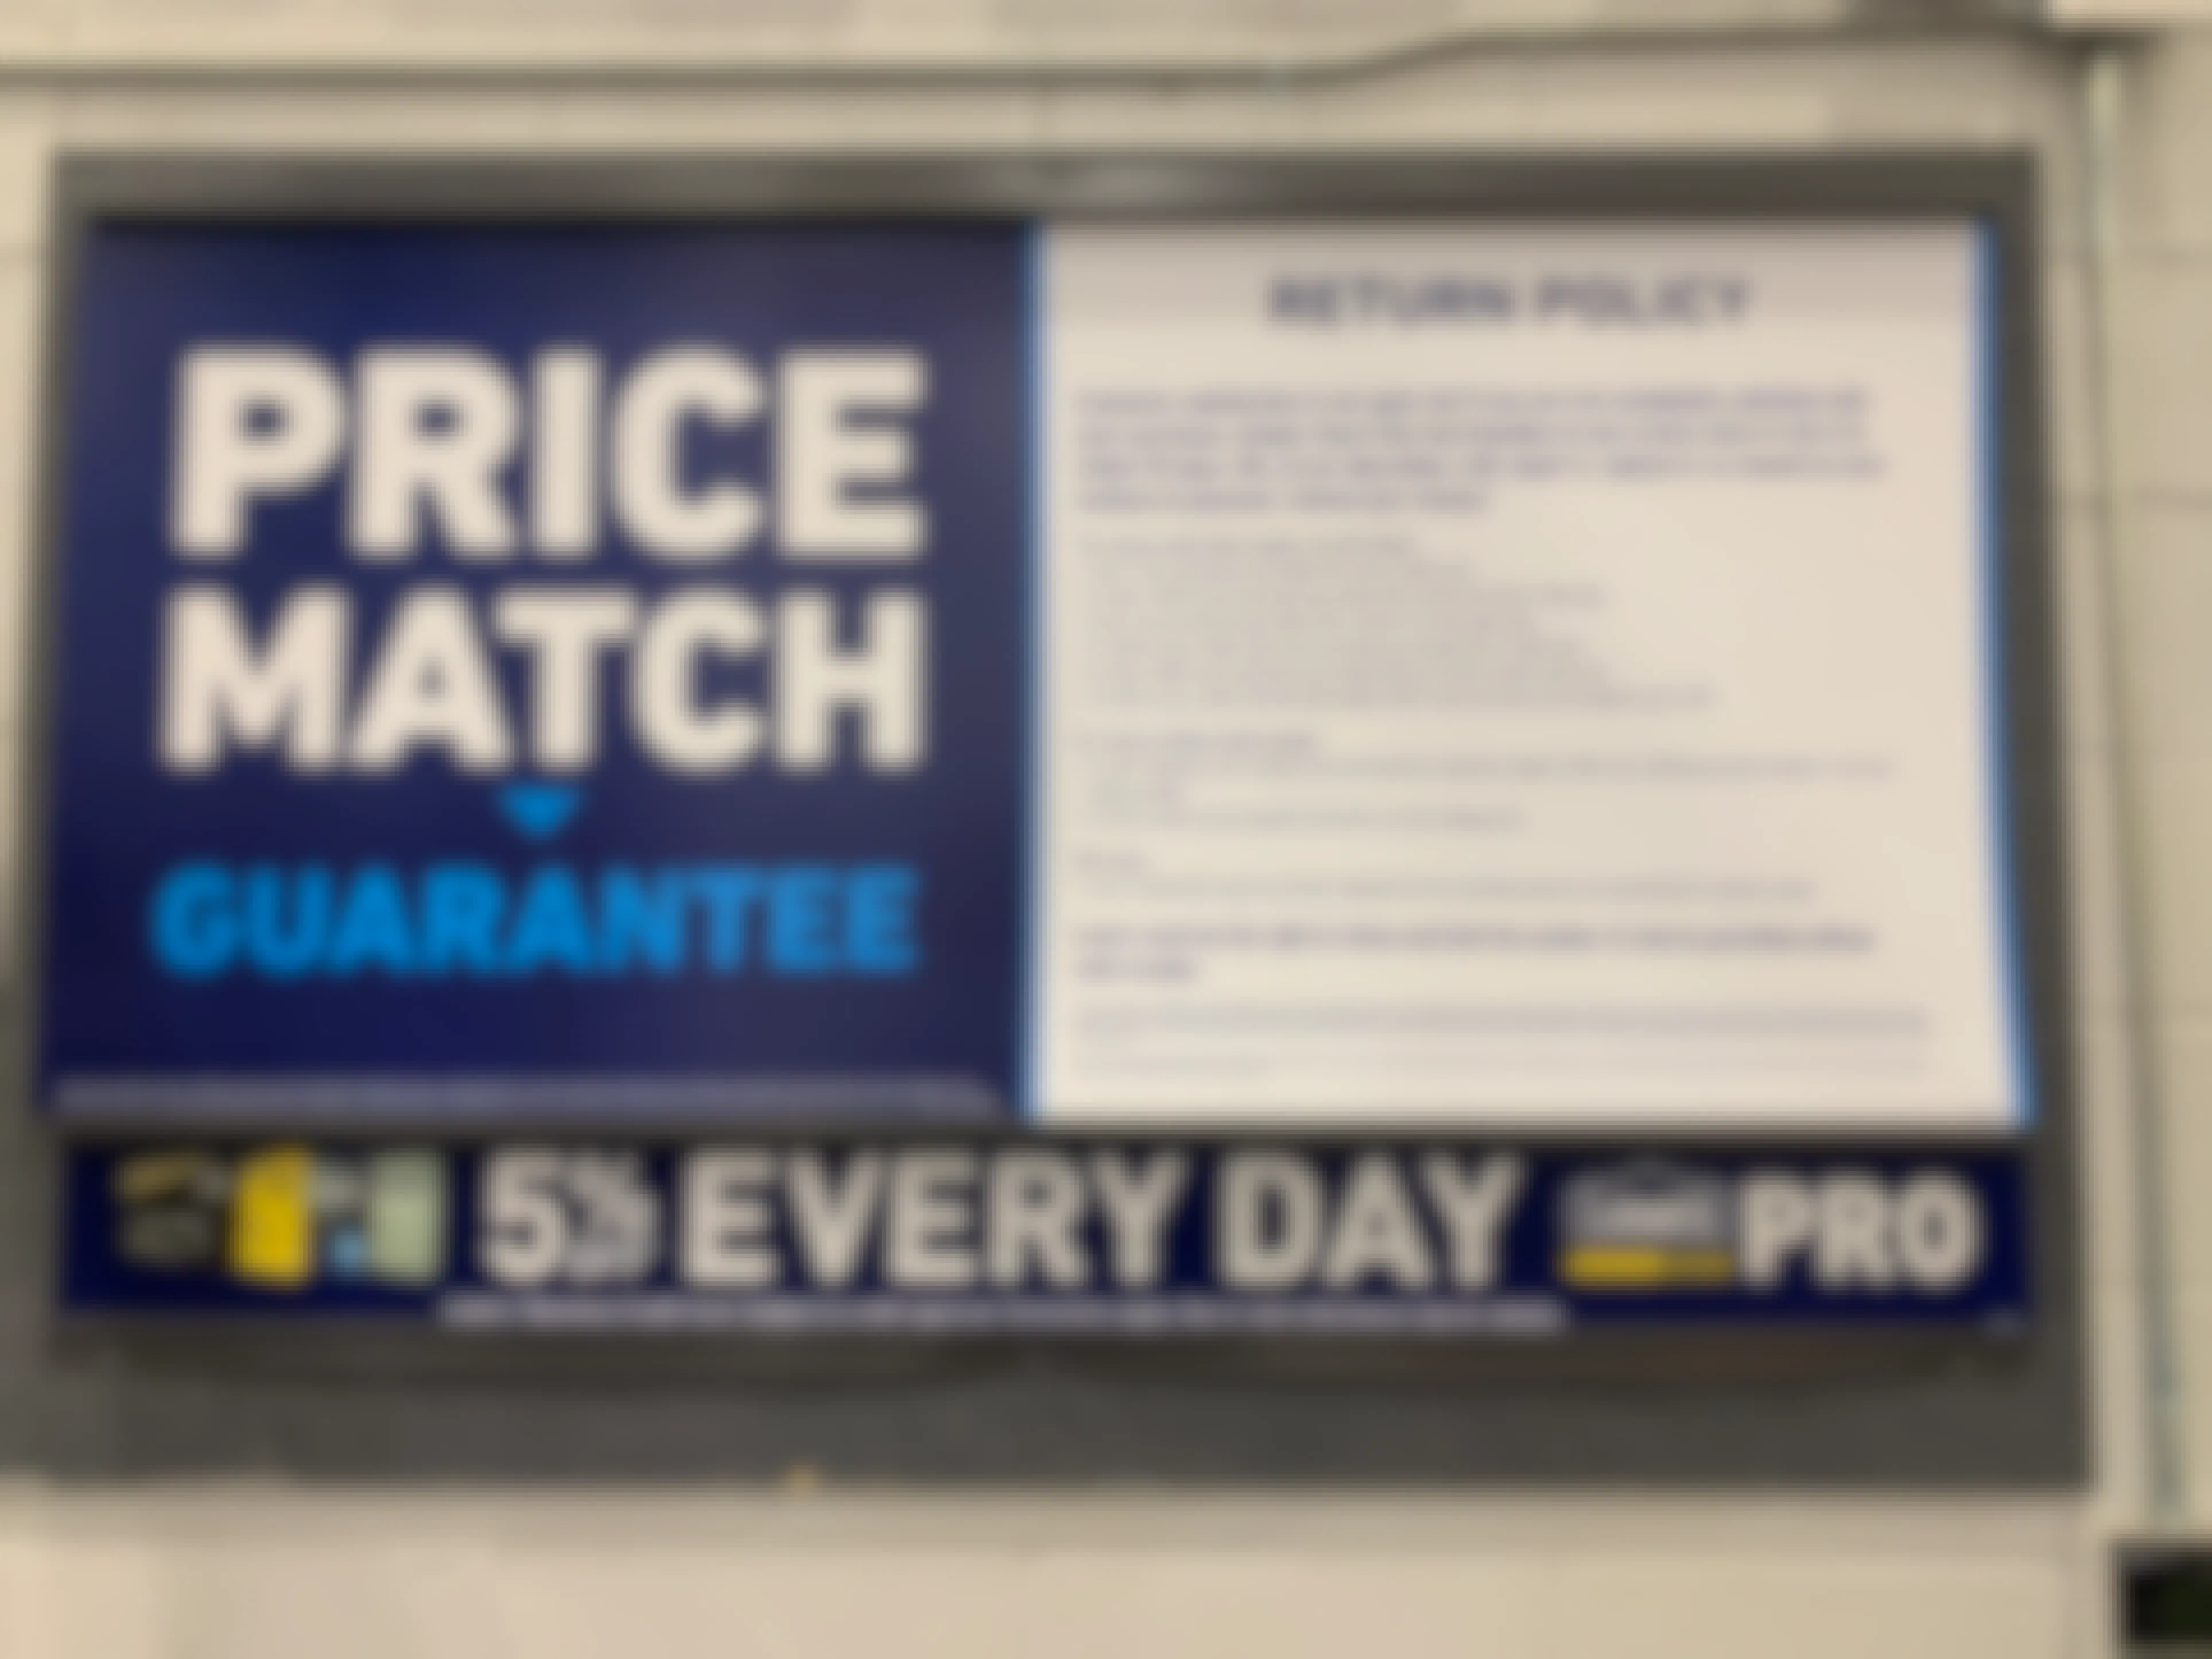 Sign of the Lowe's price match guarantee and return policy inside Lowe's.